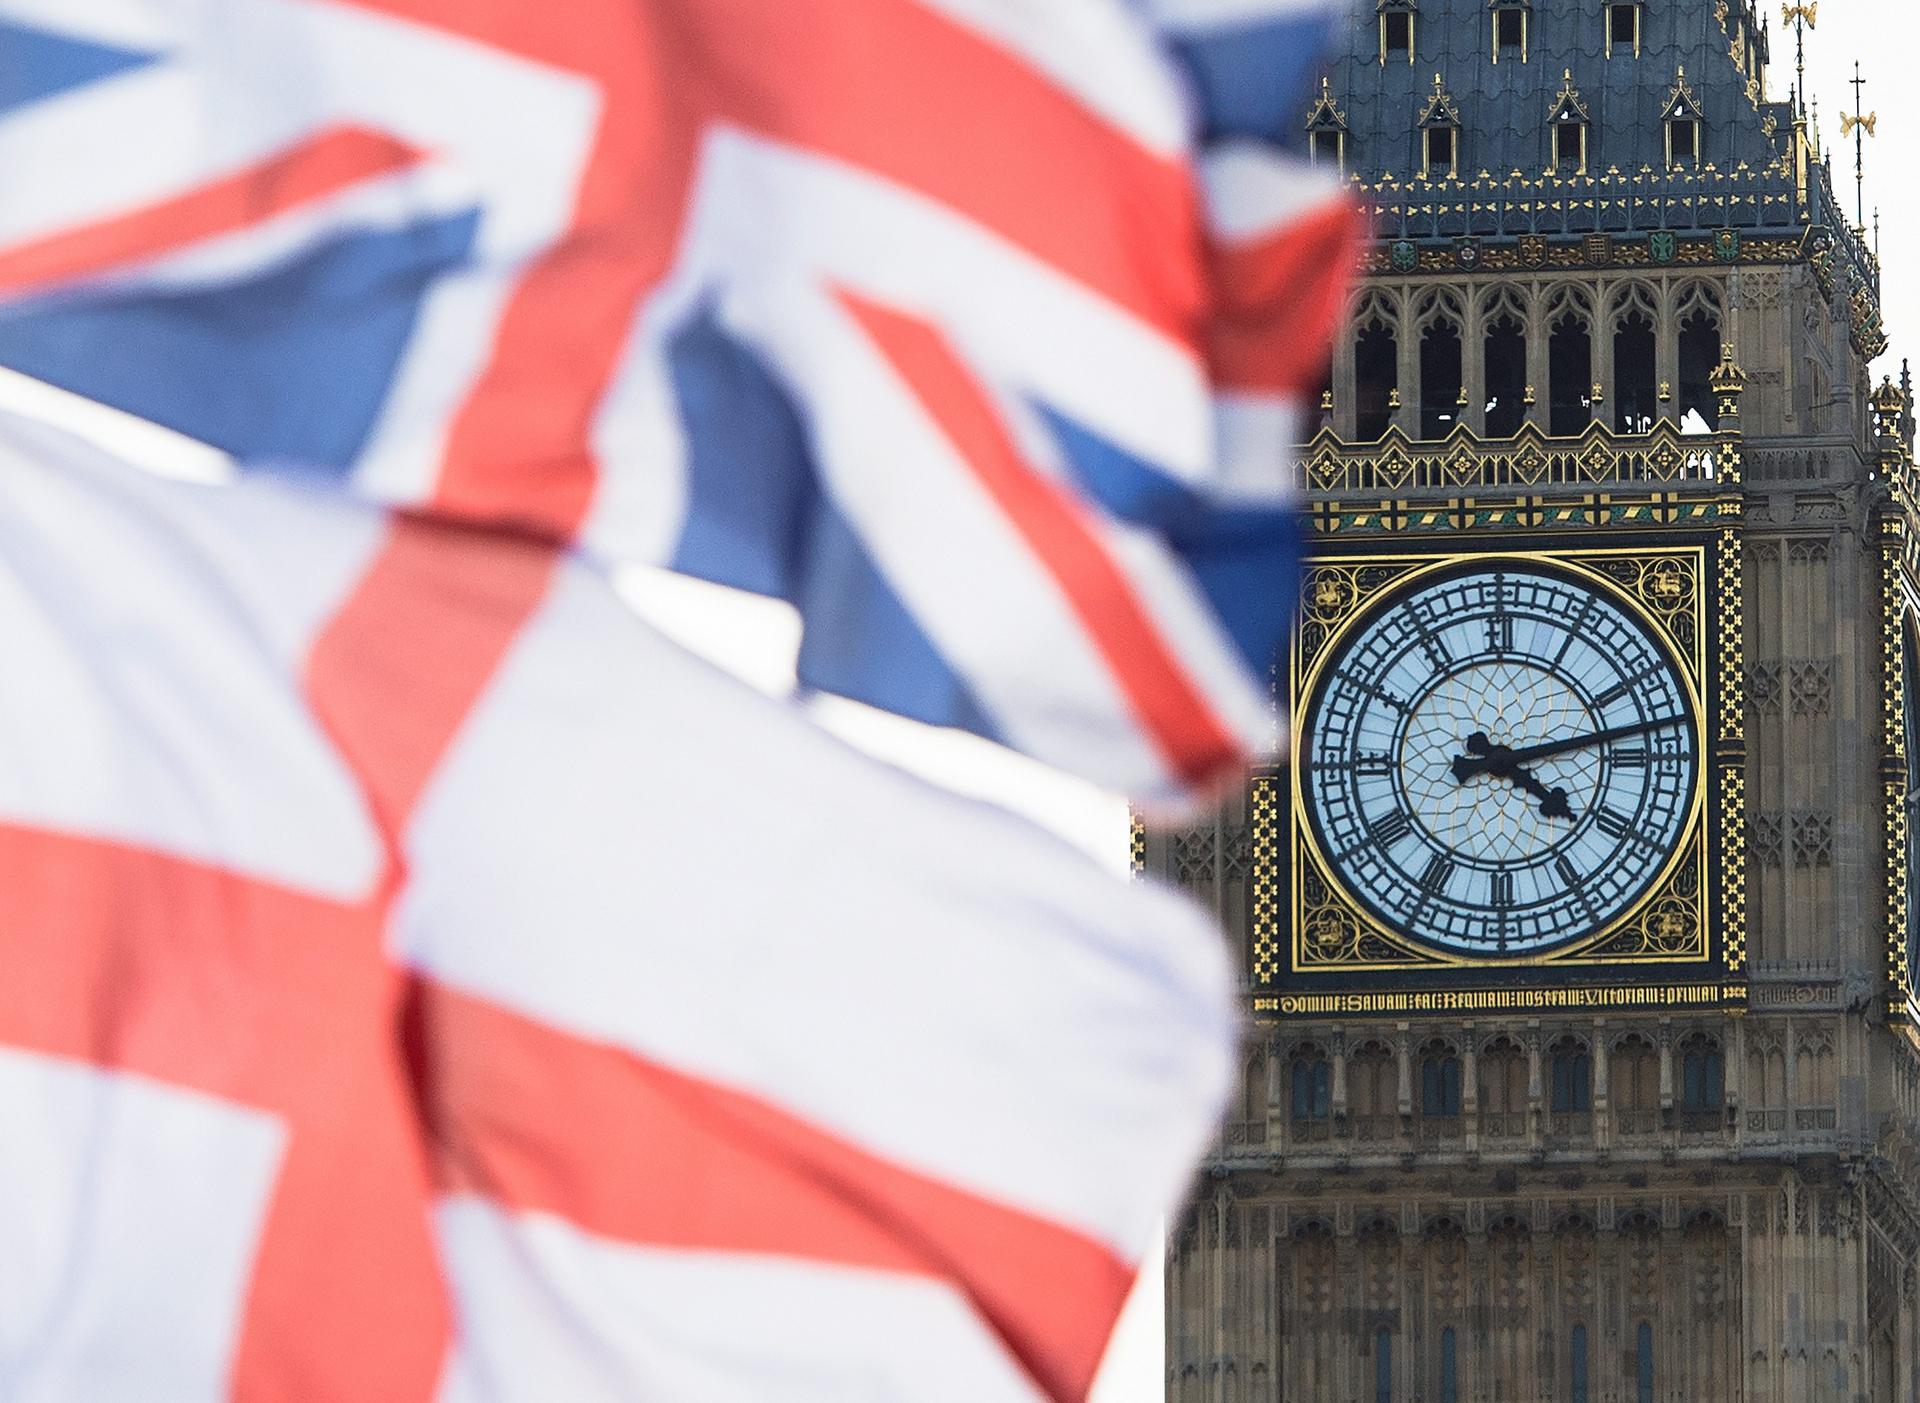 The election result could reshape British identity. Photo: EPA